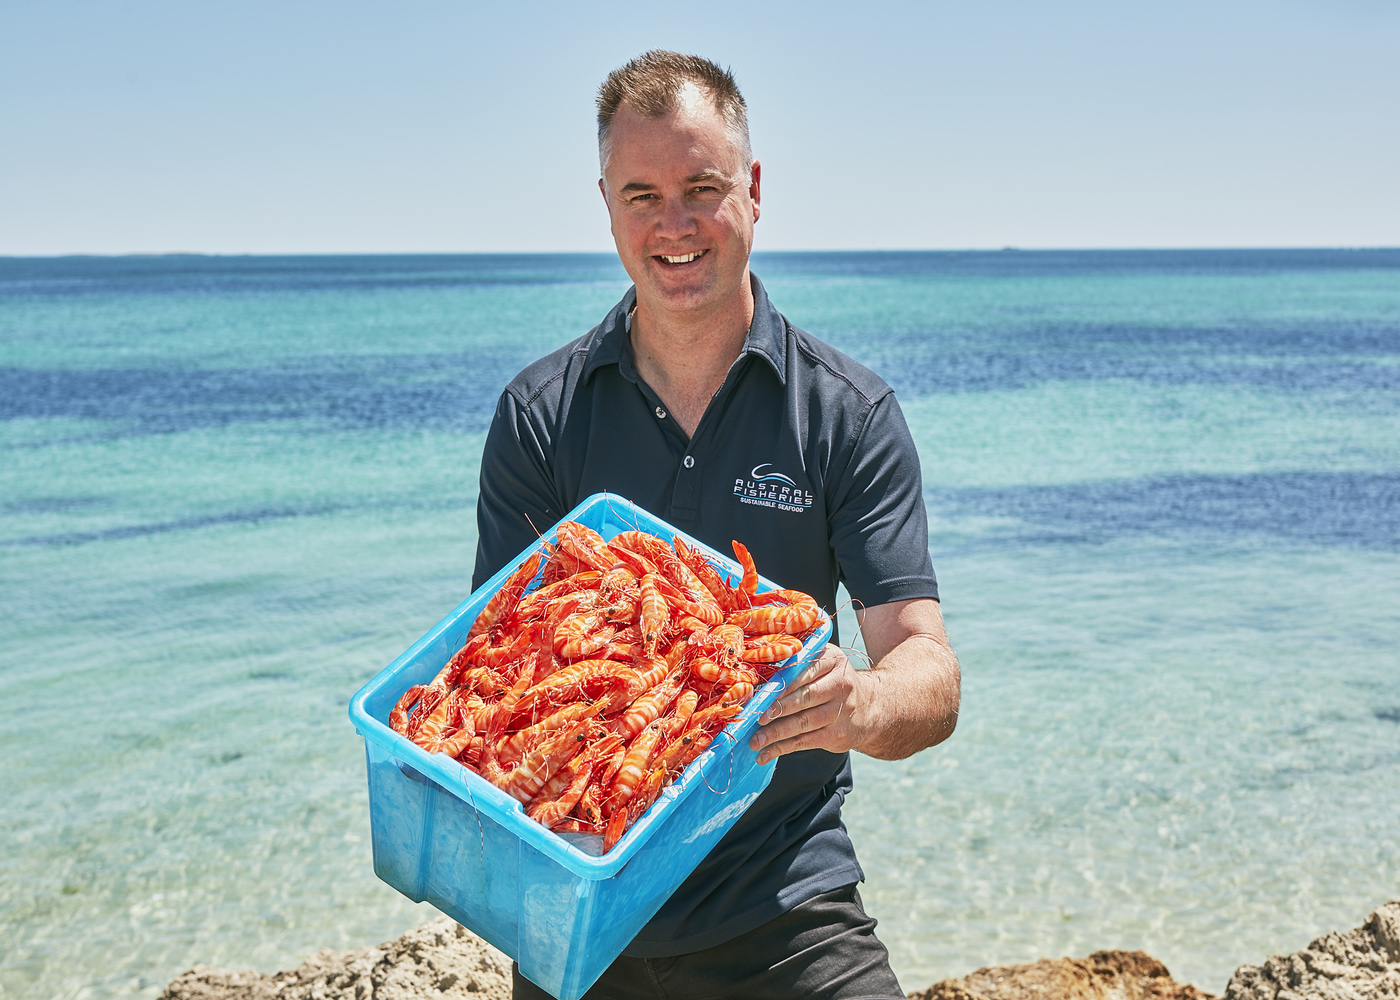 Dylan Skinns from Austral Fisheries is a carbon neutral business that supplies Coles with Australian MSC-certified raw banana prawns.